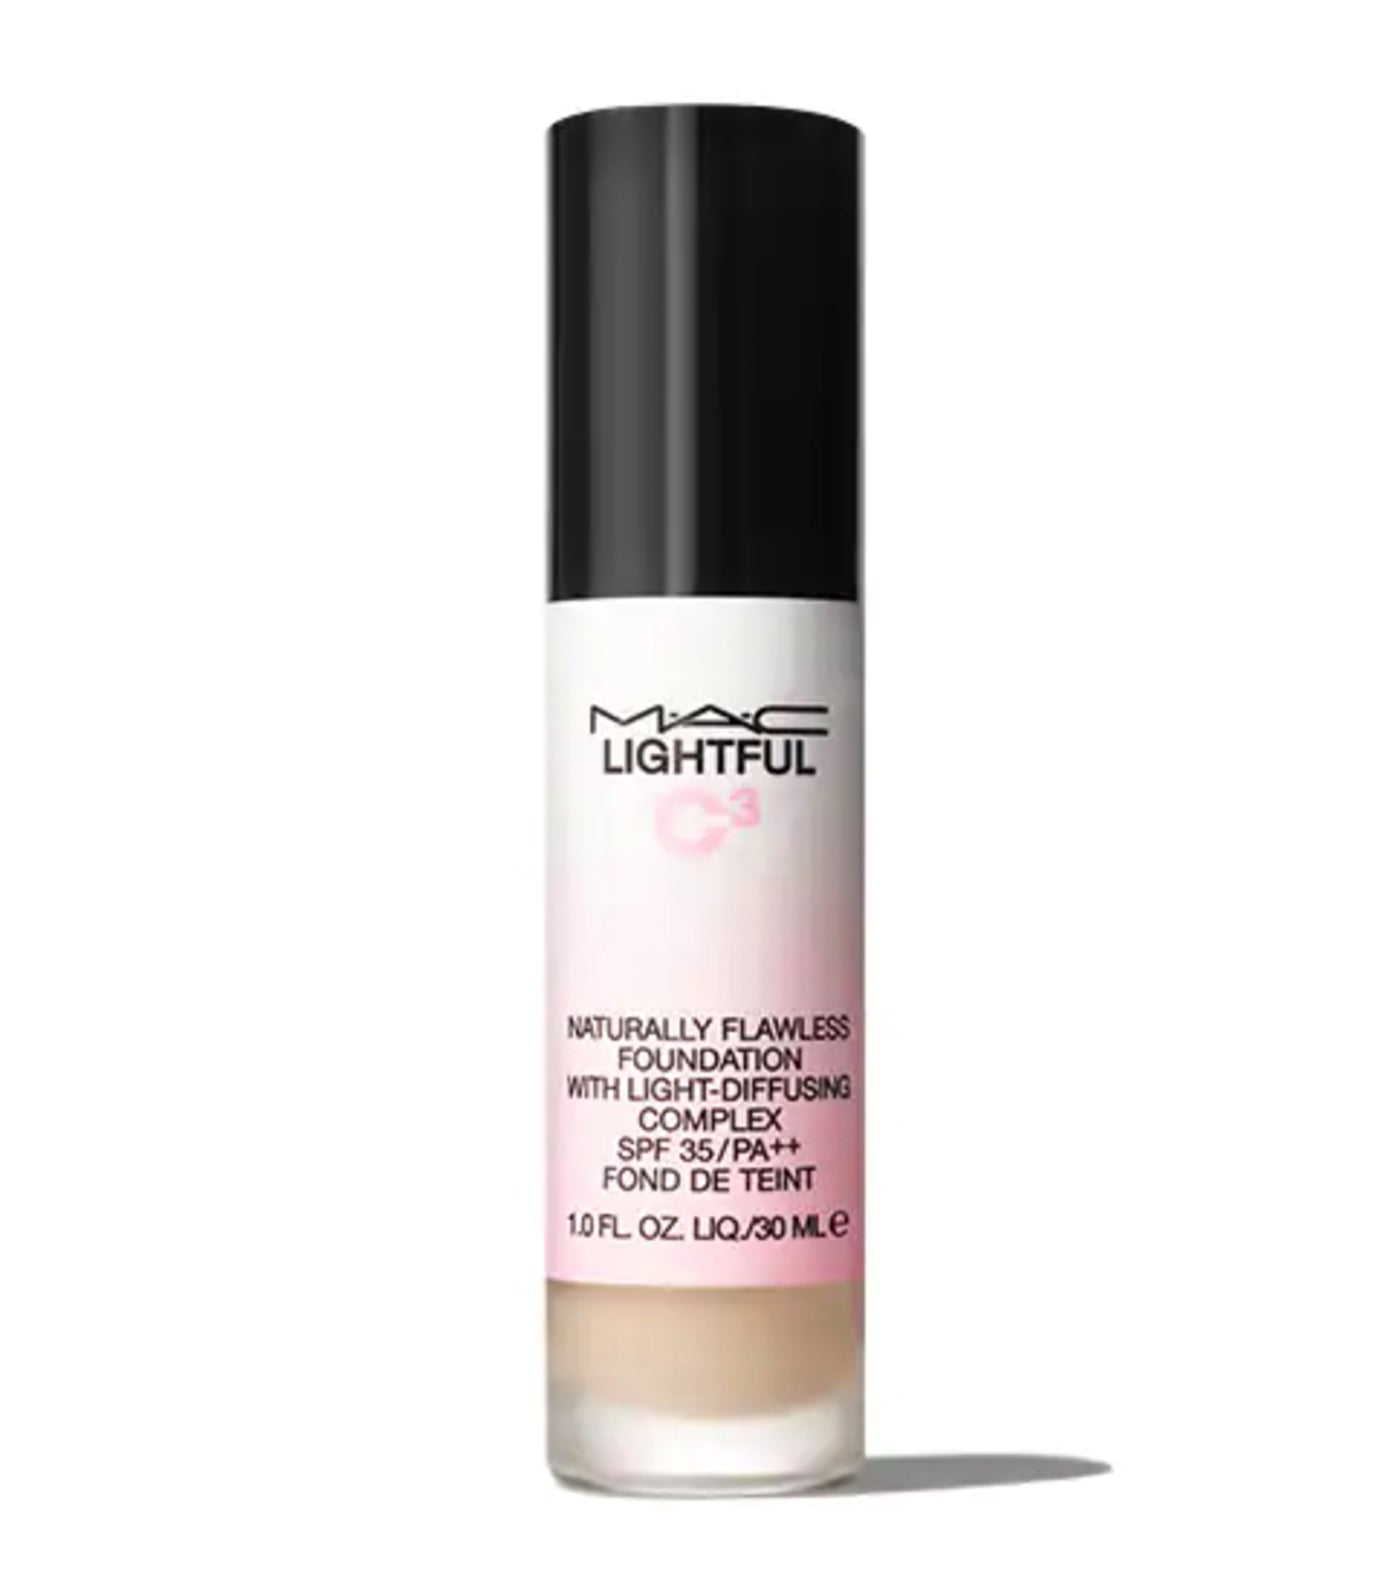 Lightful C³ Naturally Flawless Foundation with Light-diffusing Complex SPF 35/PA++